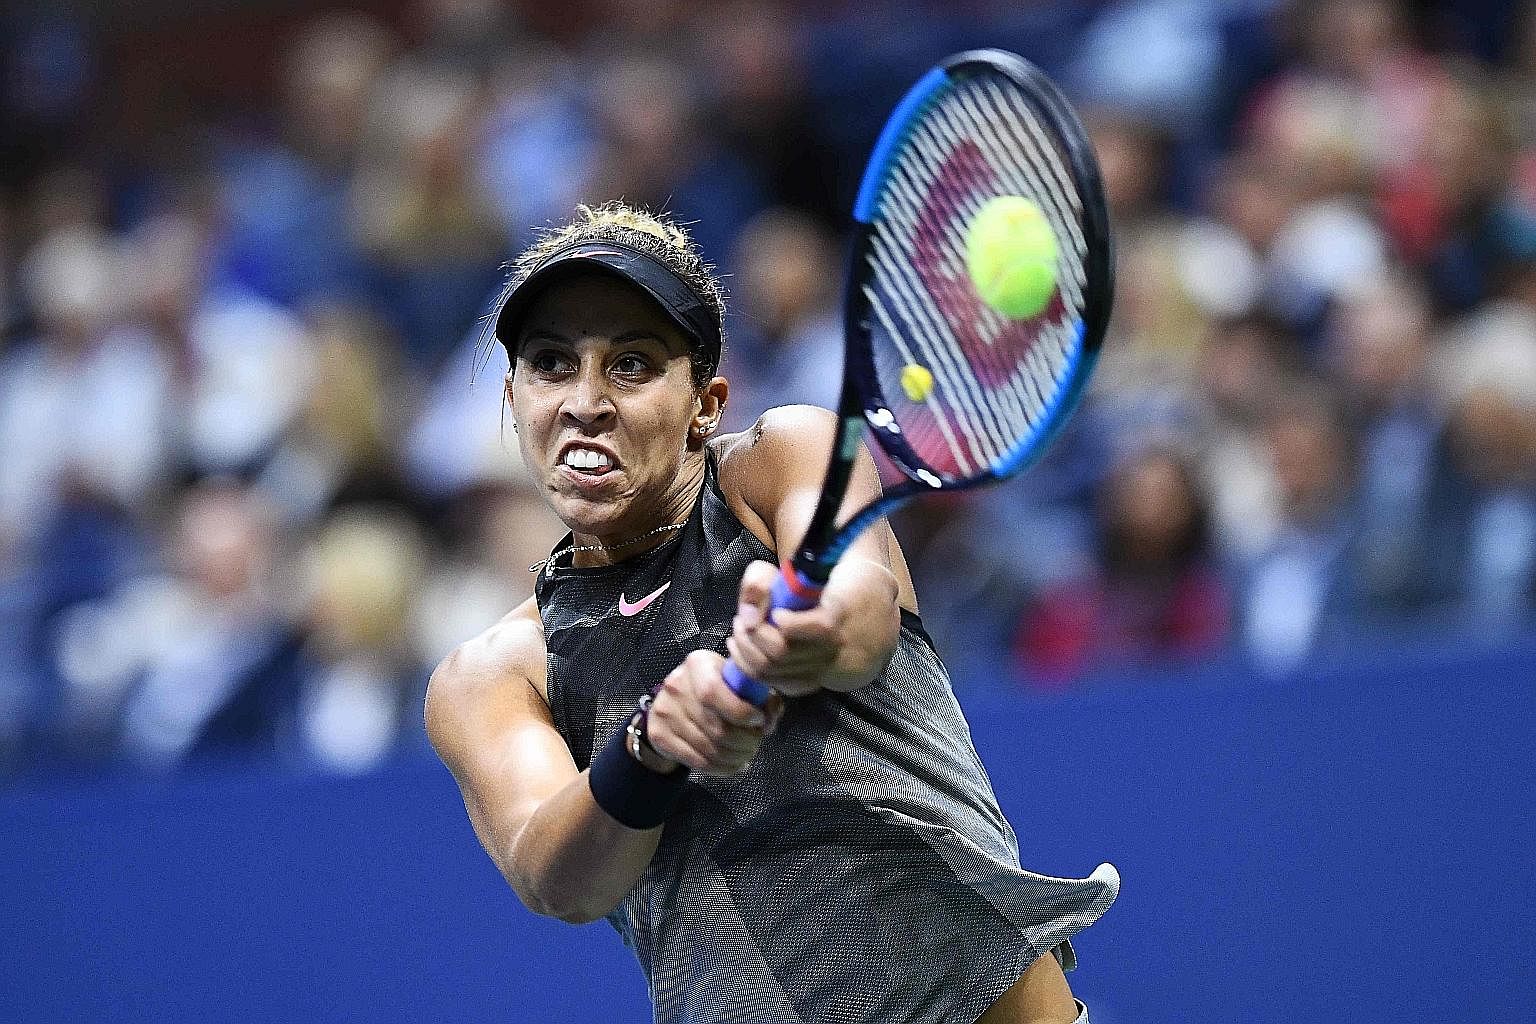 Madison Keys hitting a backhand en route to defeating fellow American CoCo Vandeweghe at the US Open to make her first Major final.